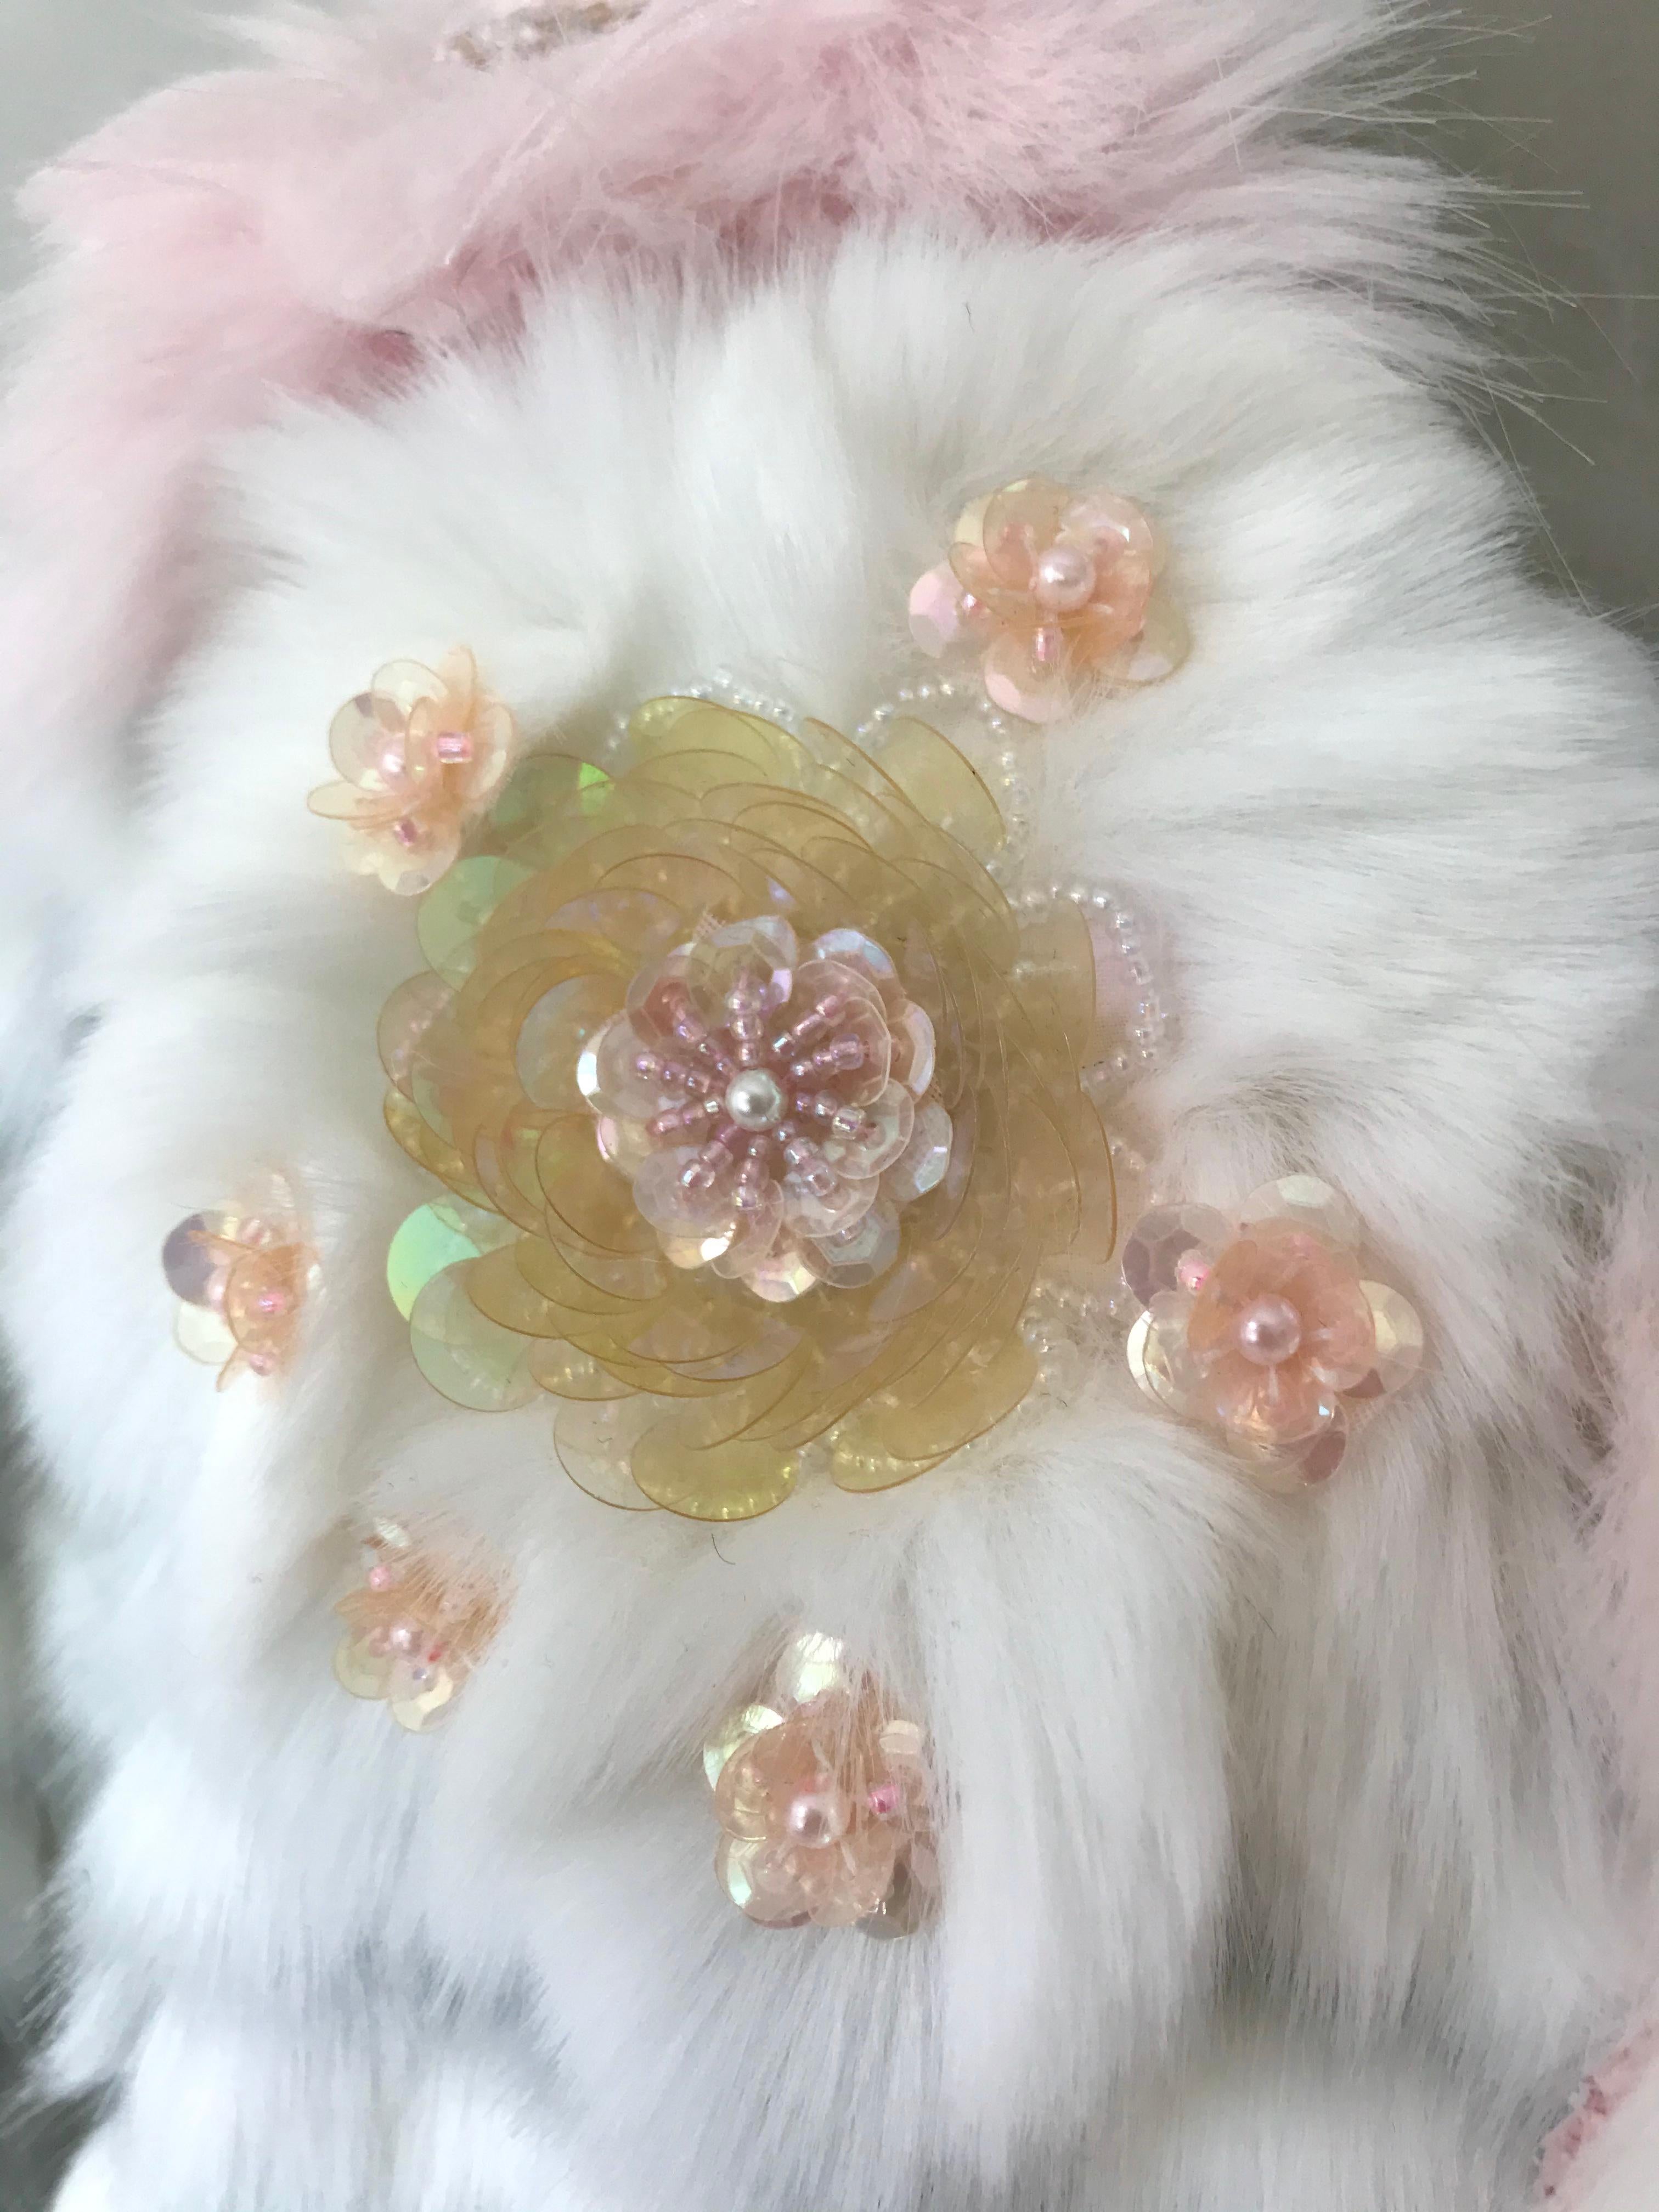 Pelush White Couture Faux Fur Mink Coat With Three Dimensional Flowers - Small For Sale 10